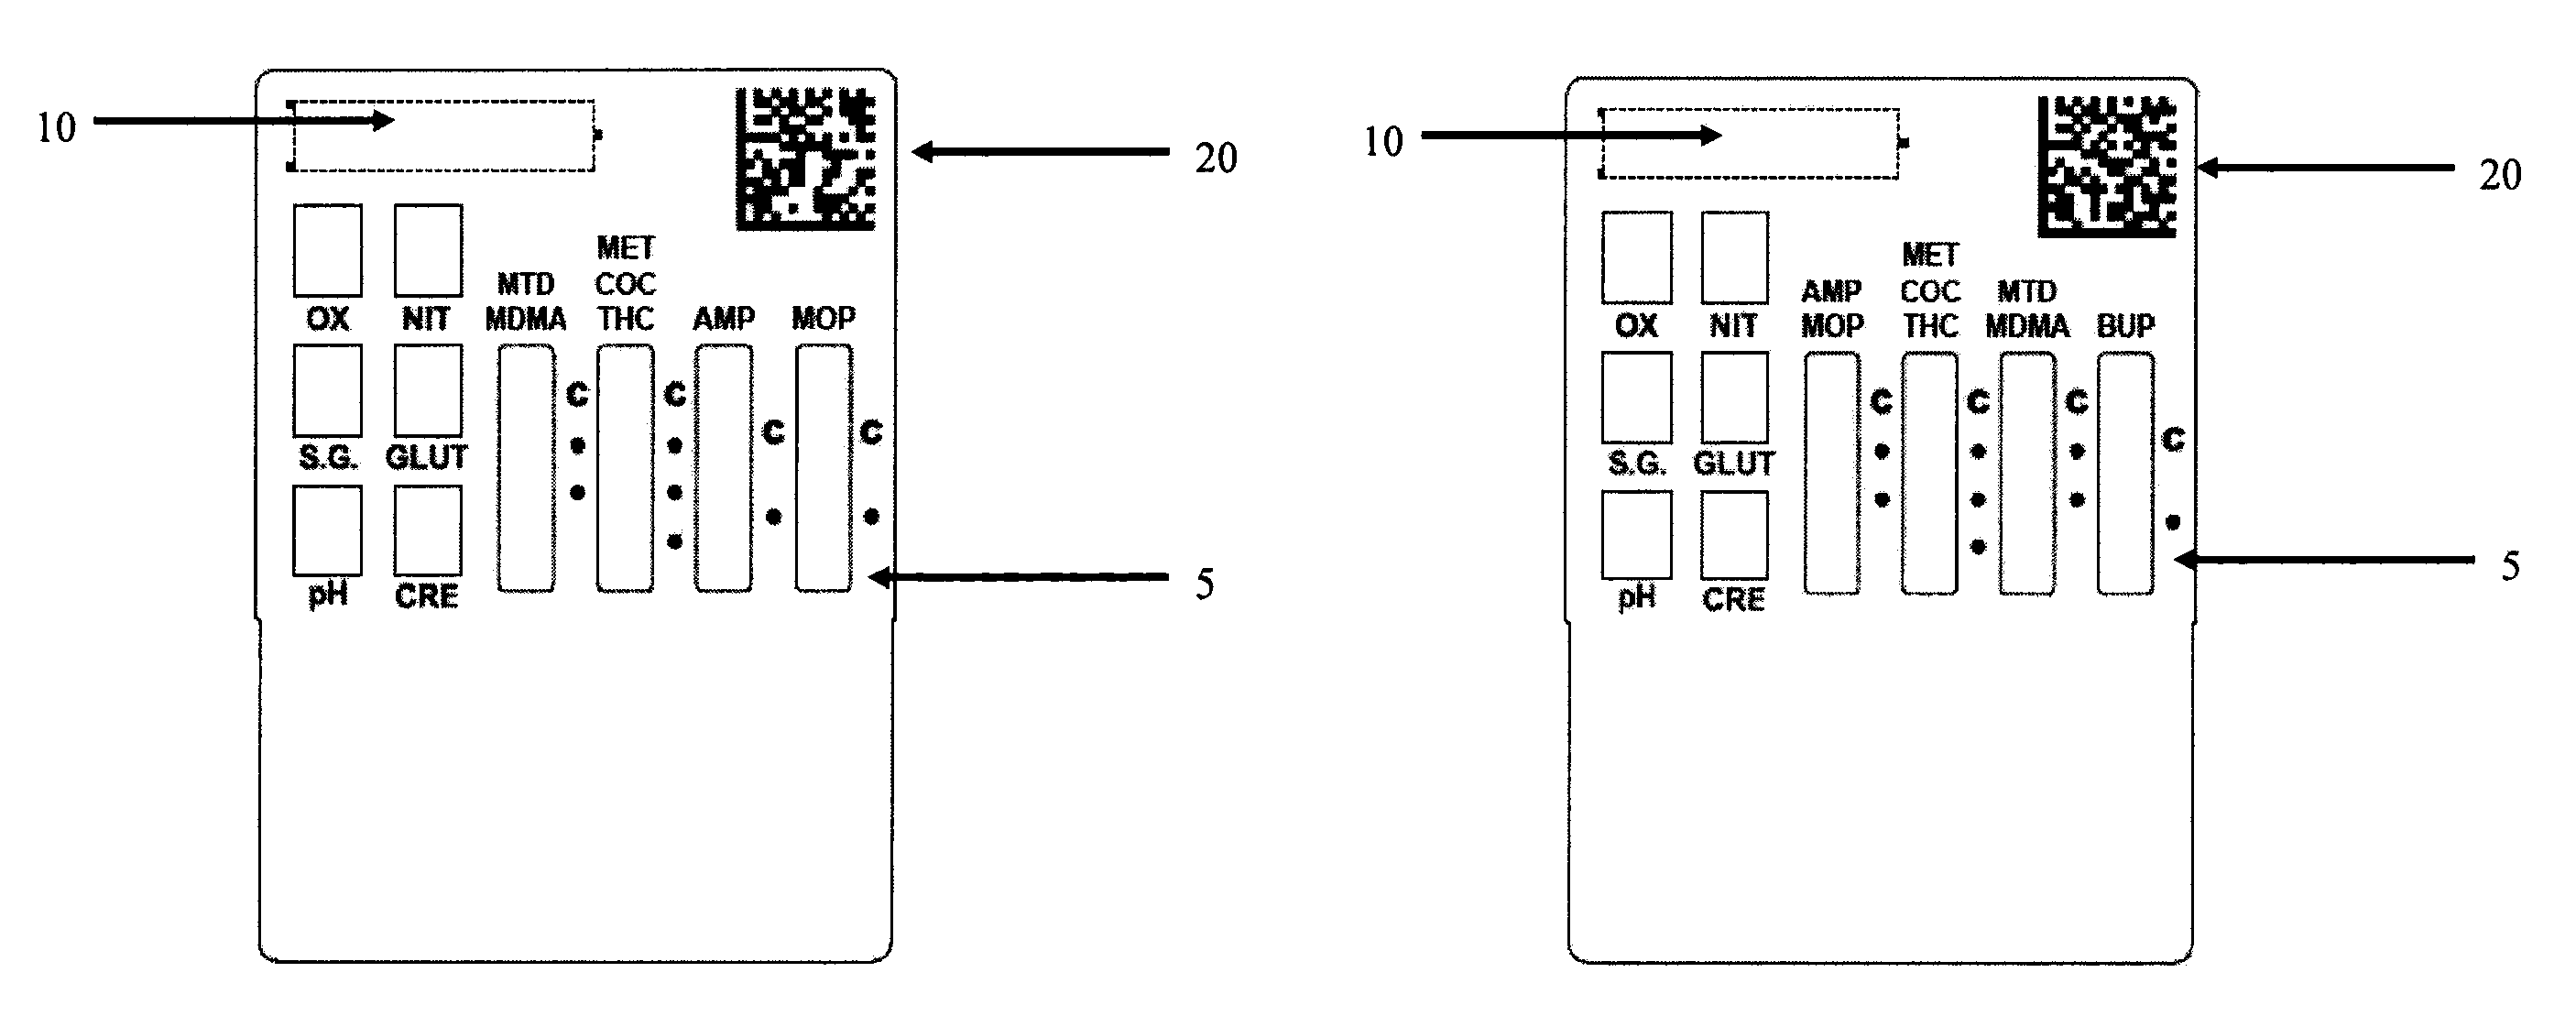 Method and system utilizing lateral flow immunoassay test device with integrated quality assurance label